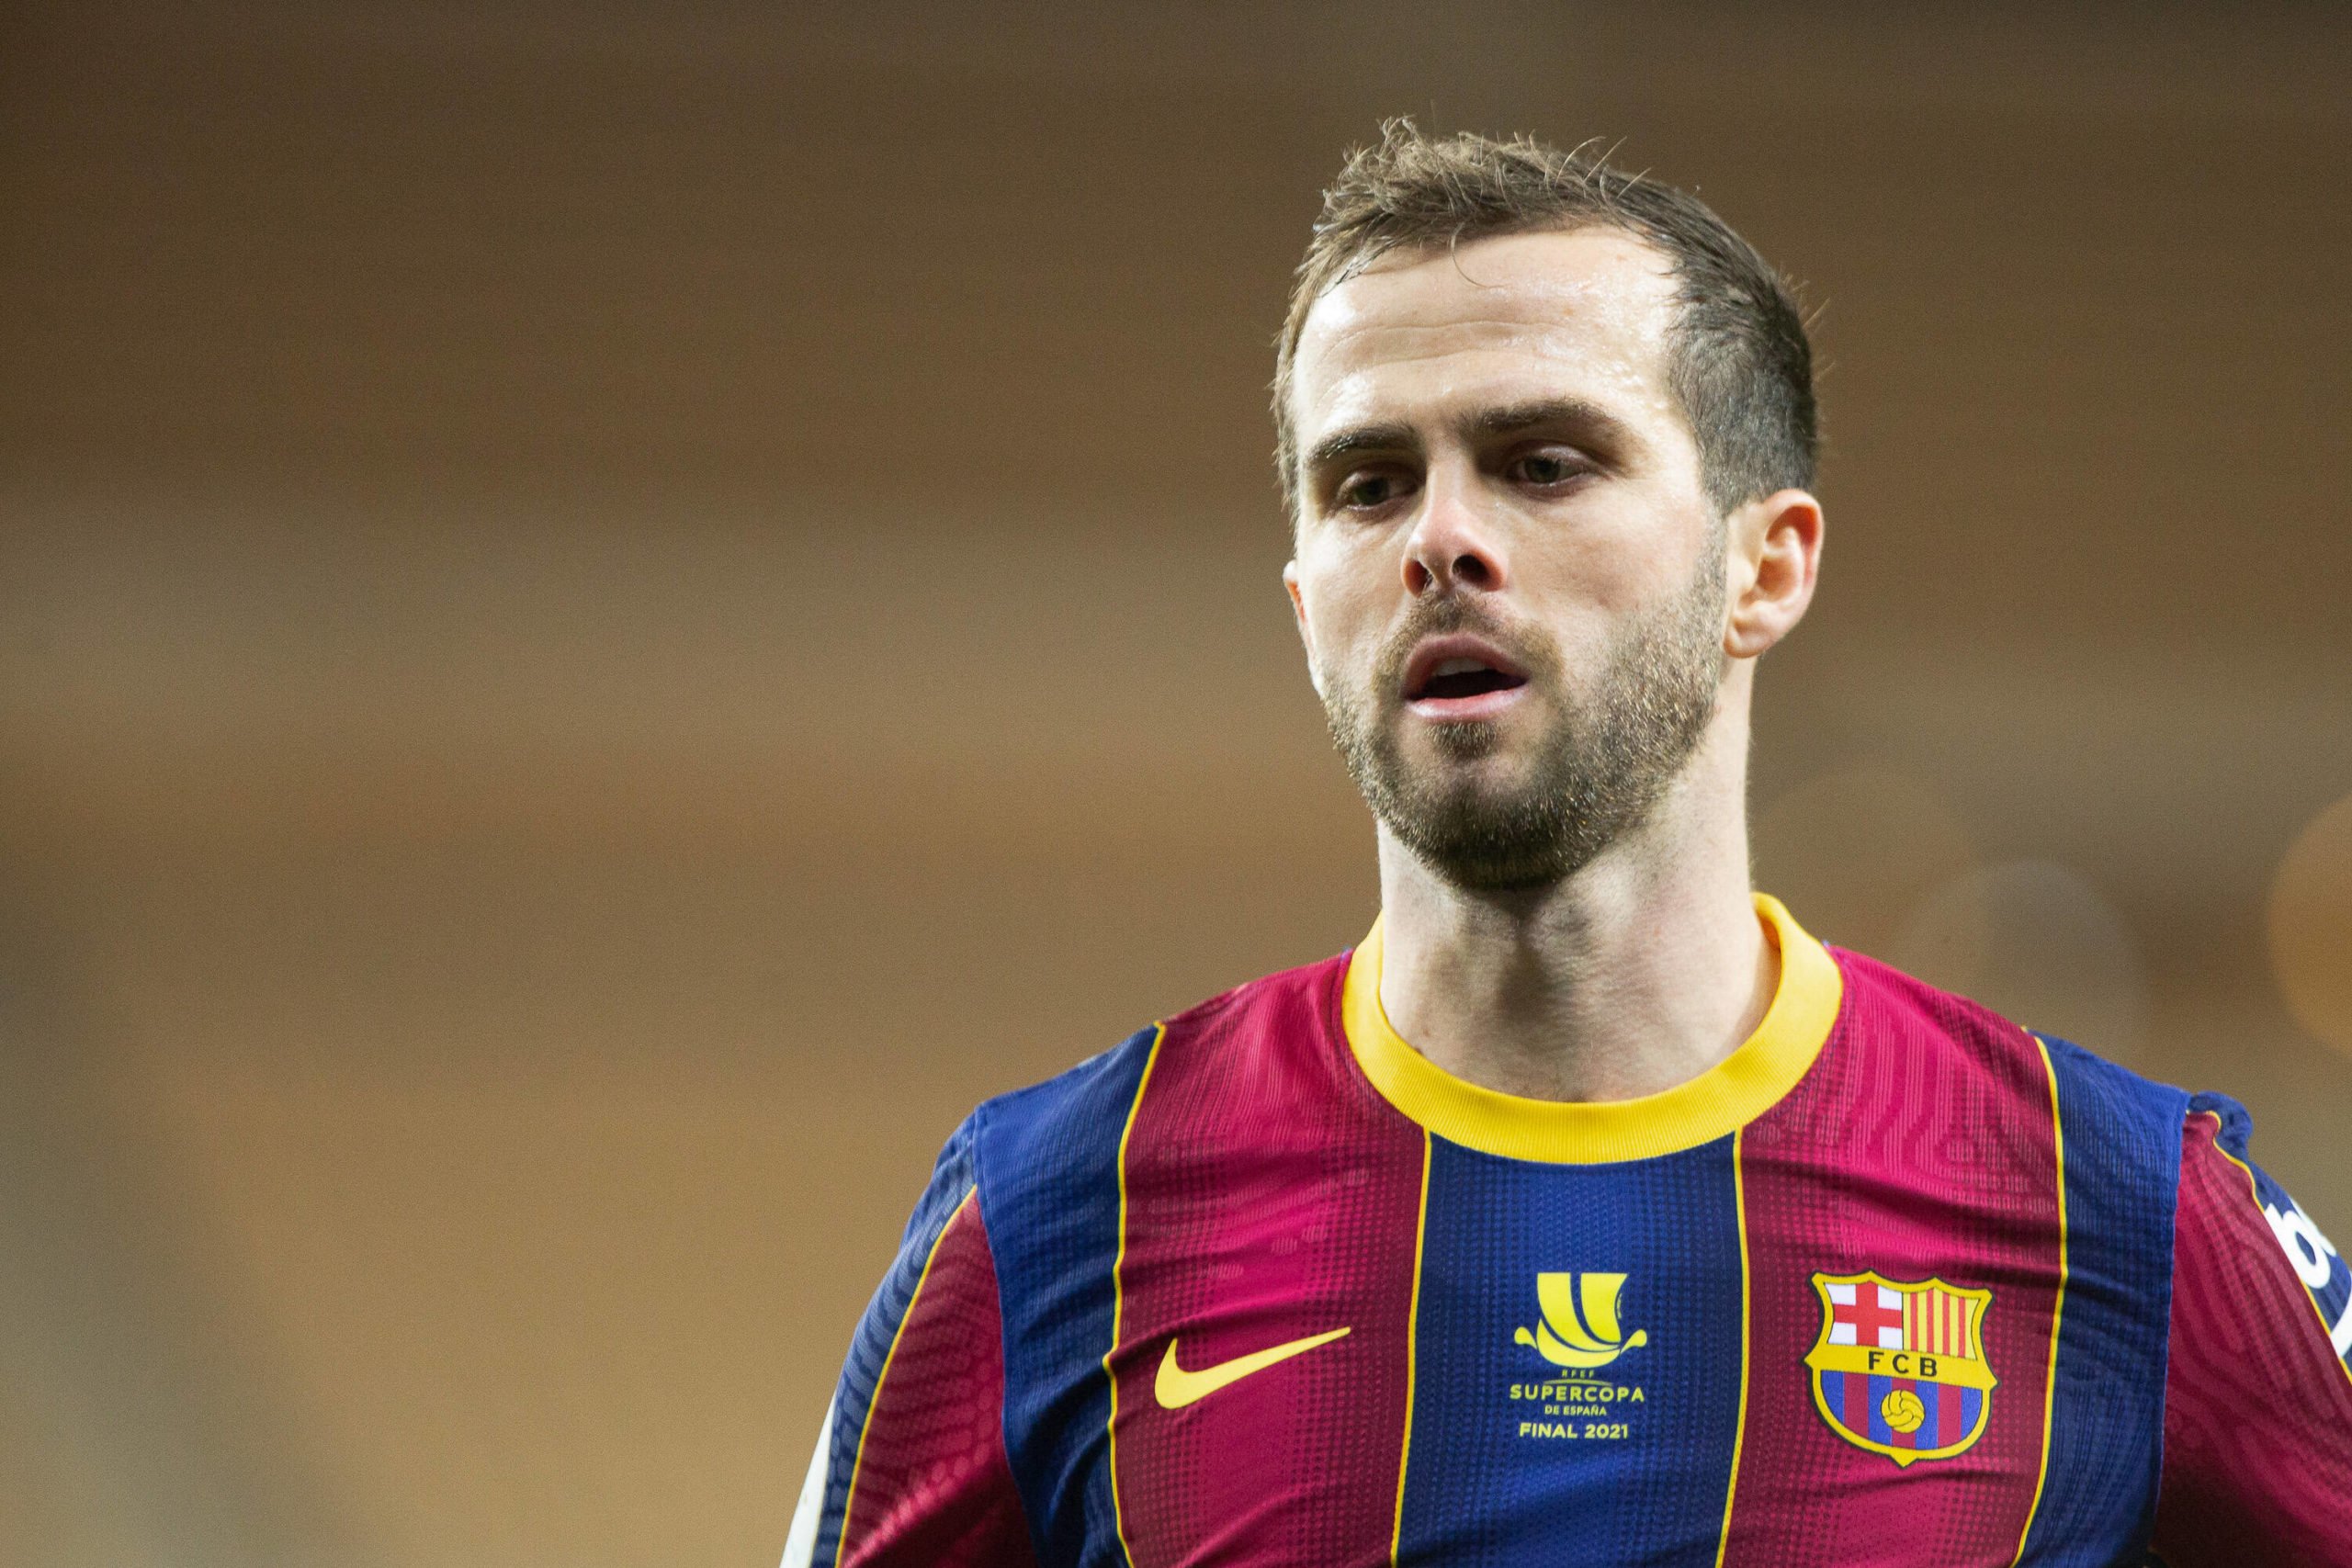 Barcelona's Pjanic seals loan move to Besiktas (Pjanic is seen in the picture)